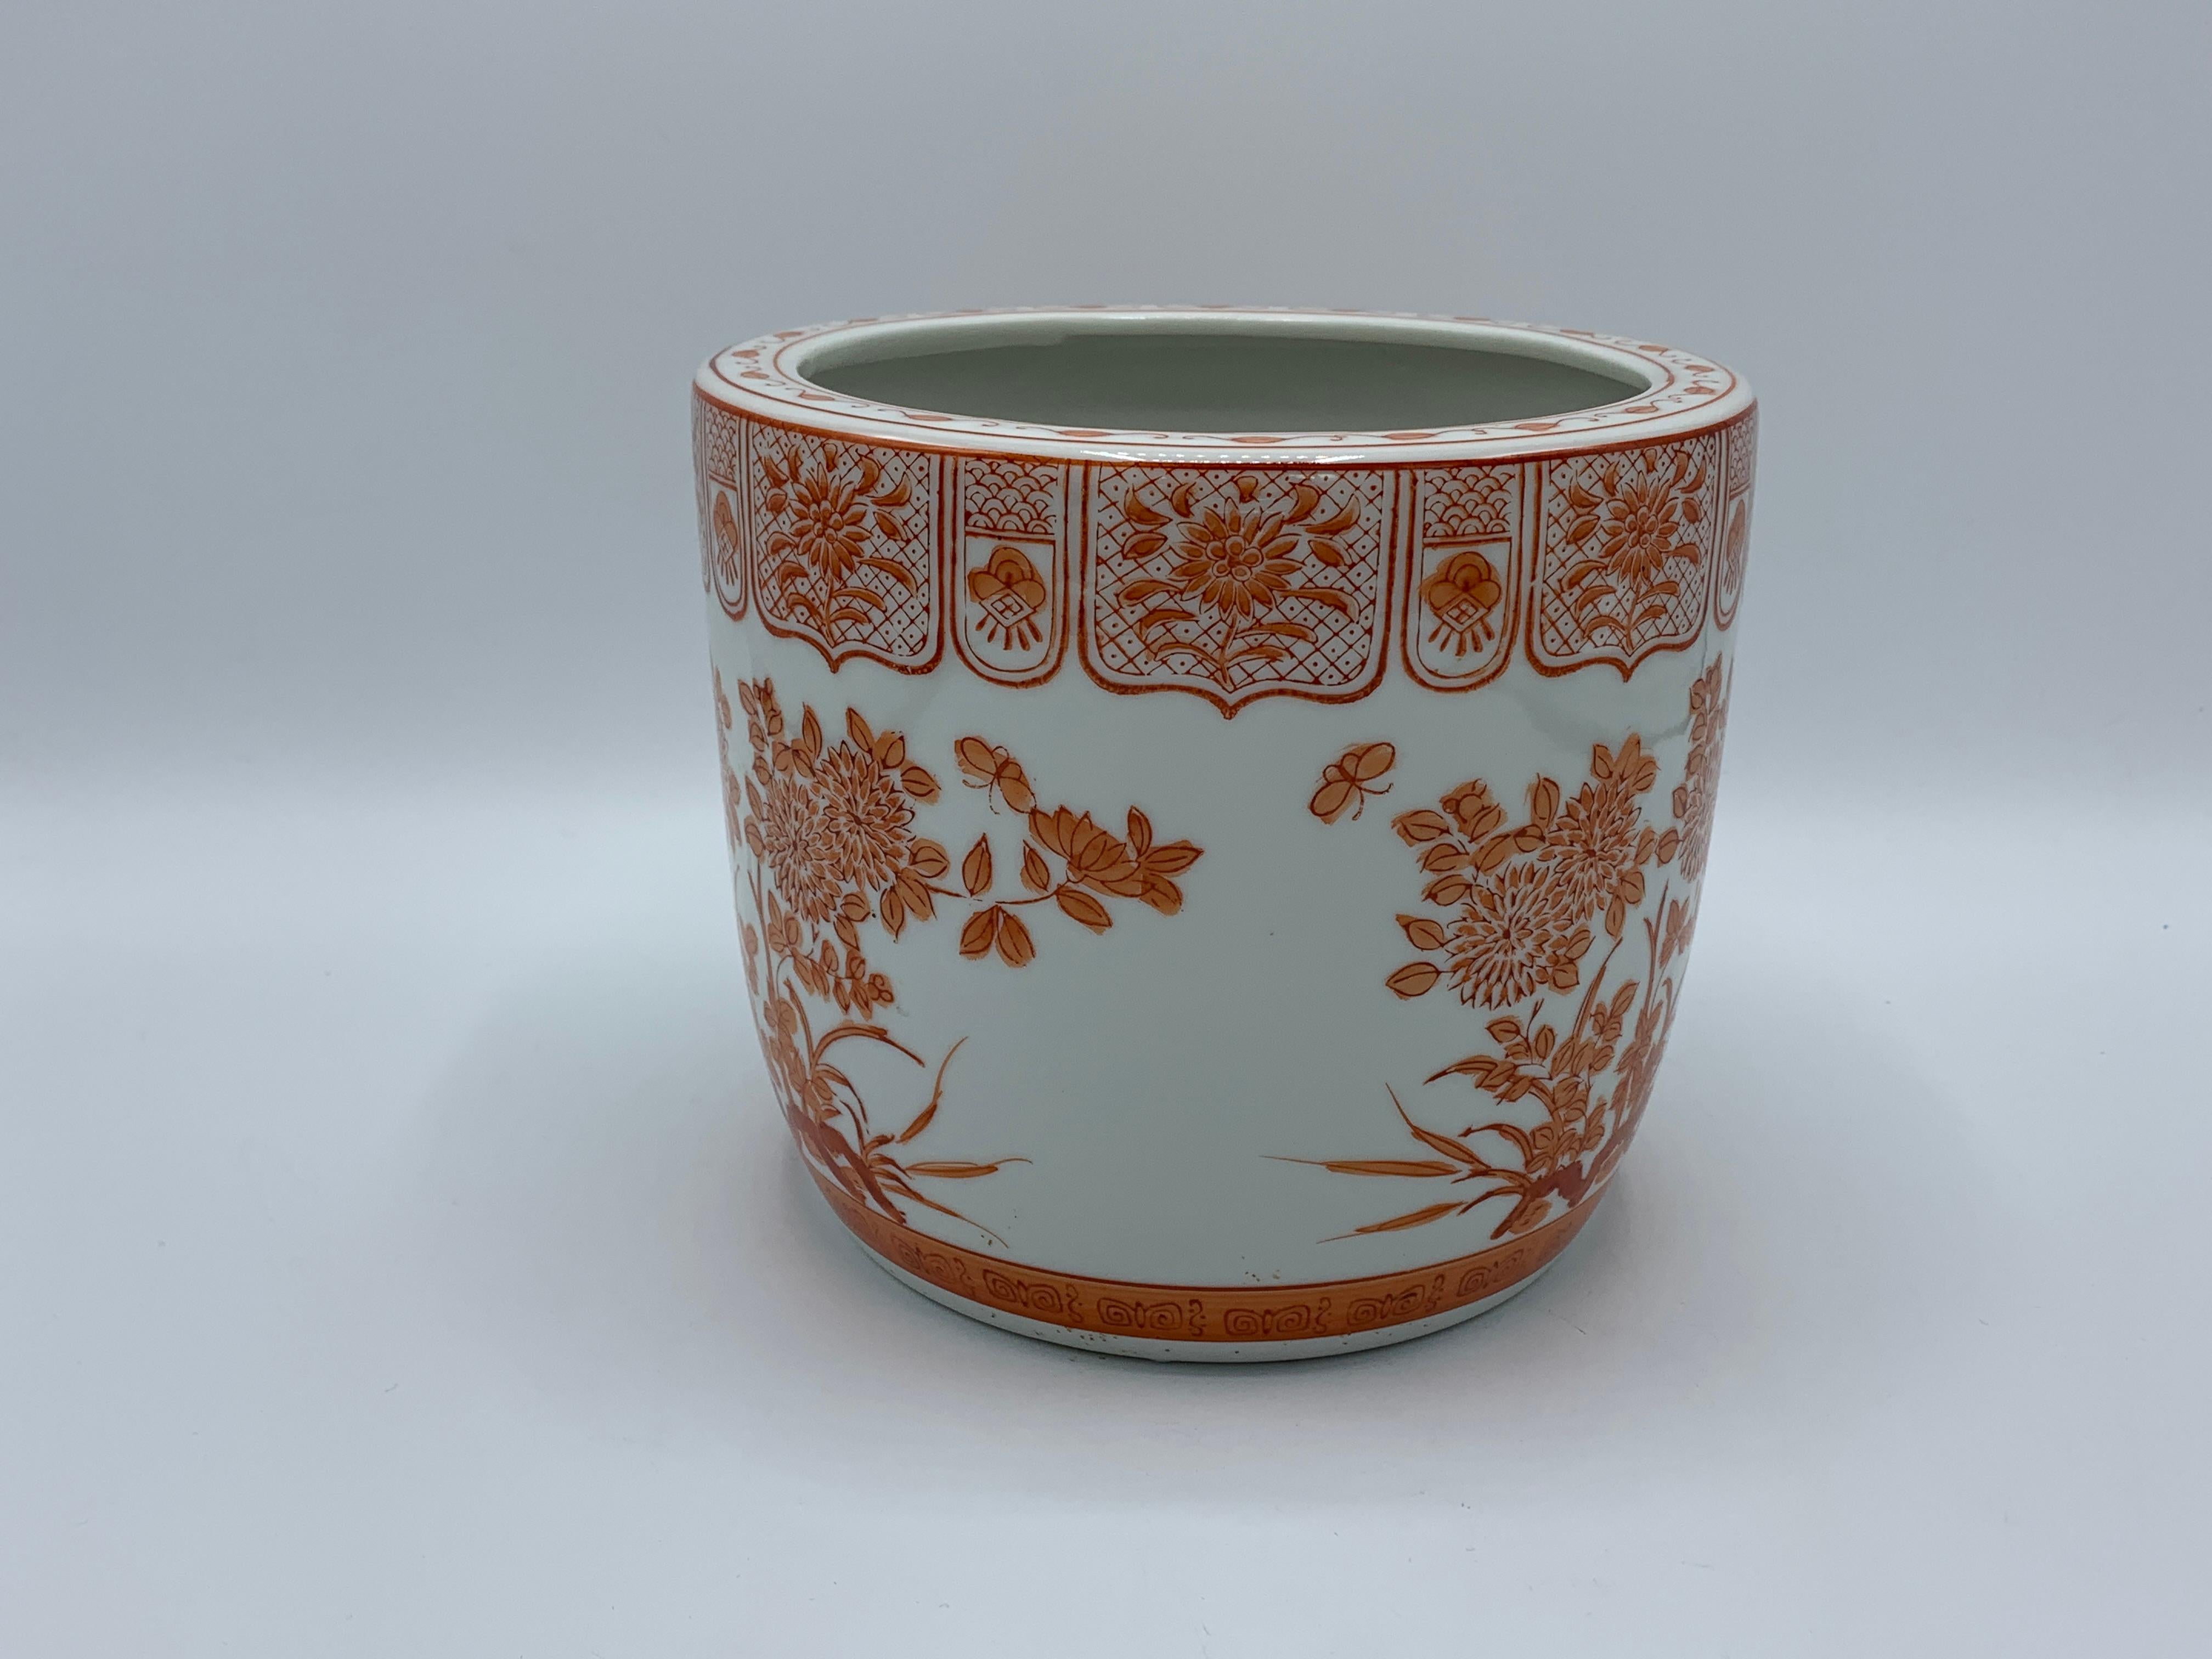 Offered is a stunning, 1970s chinoiserie orange and white cachepot with a floral motif all-over.